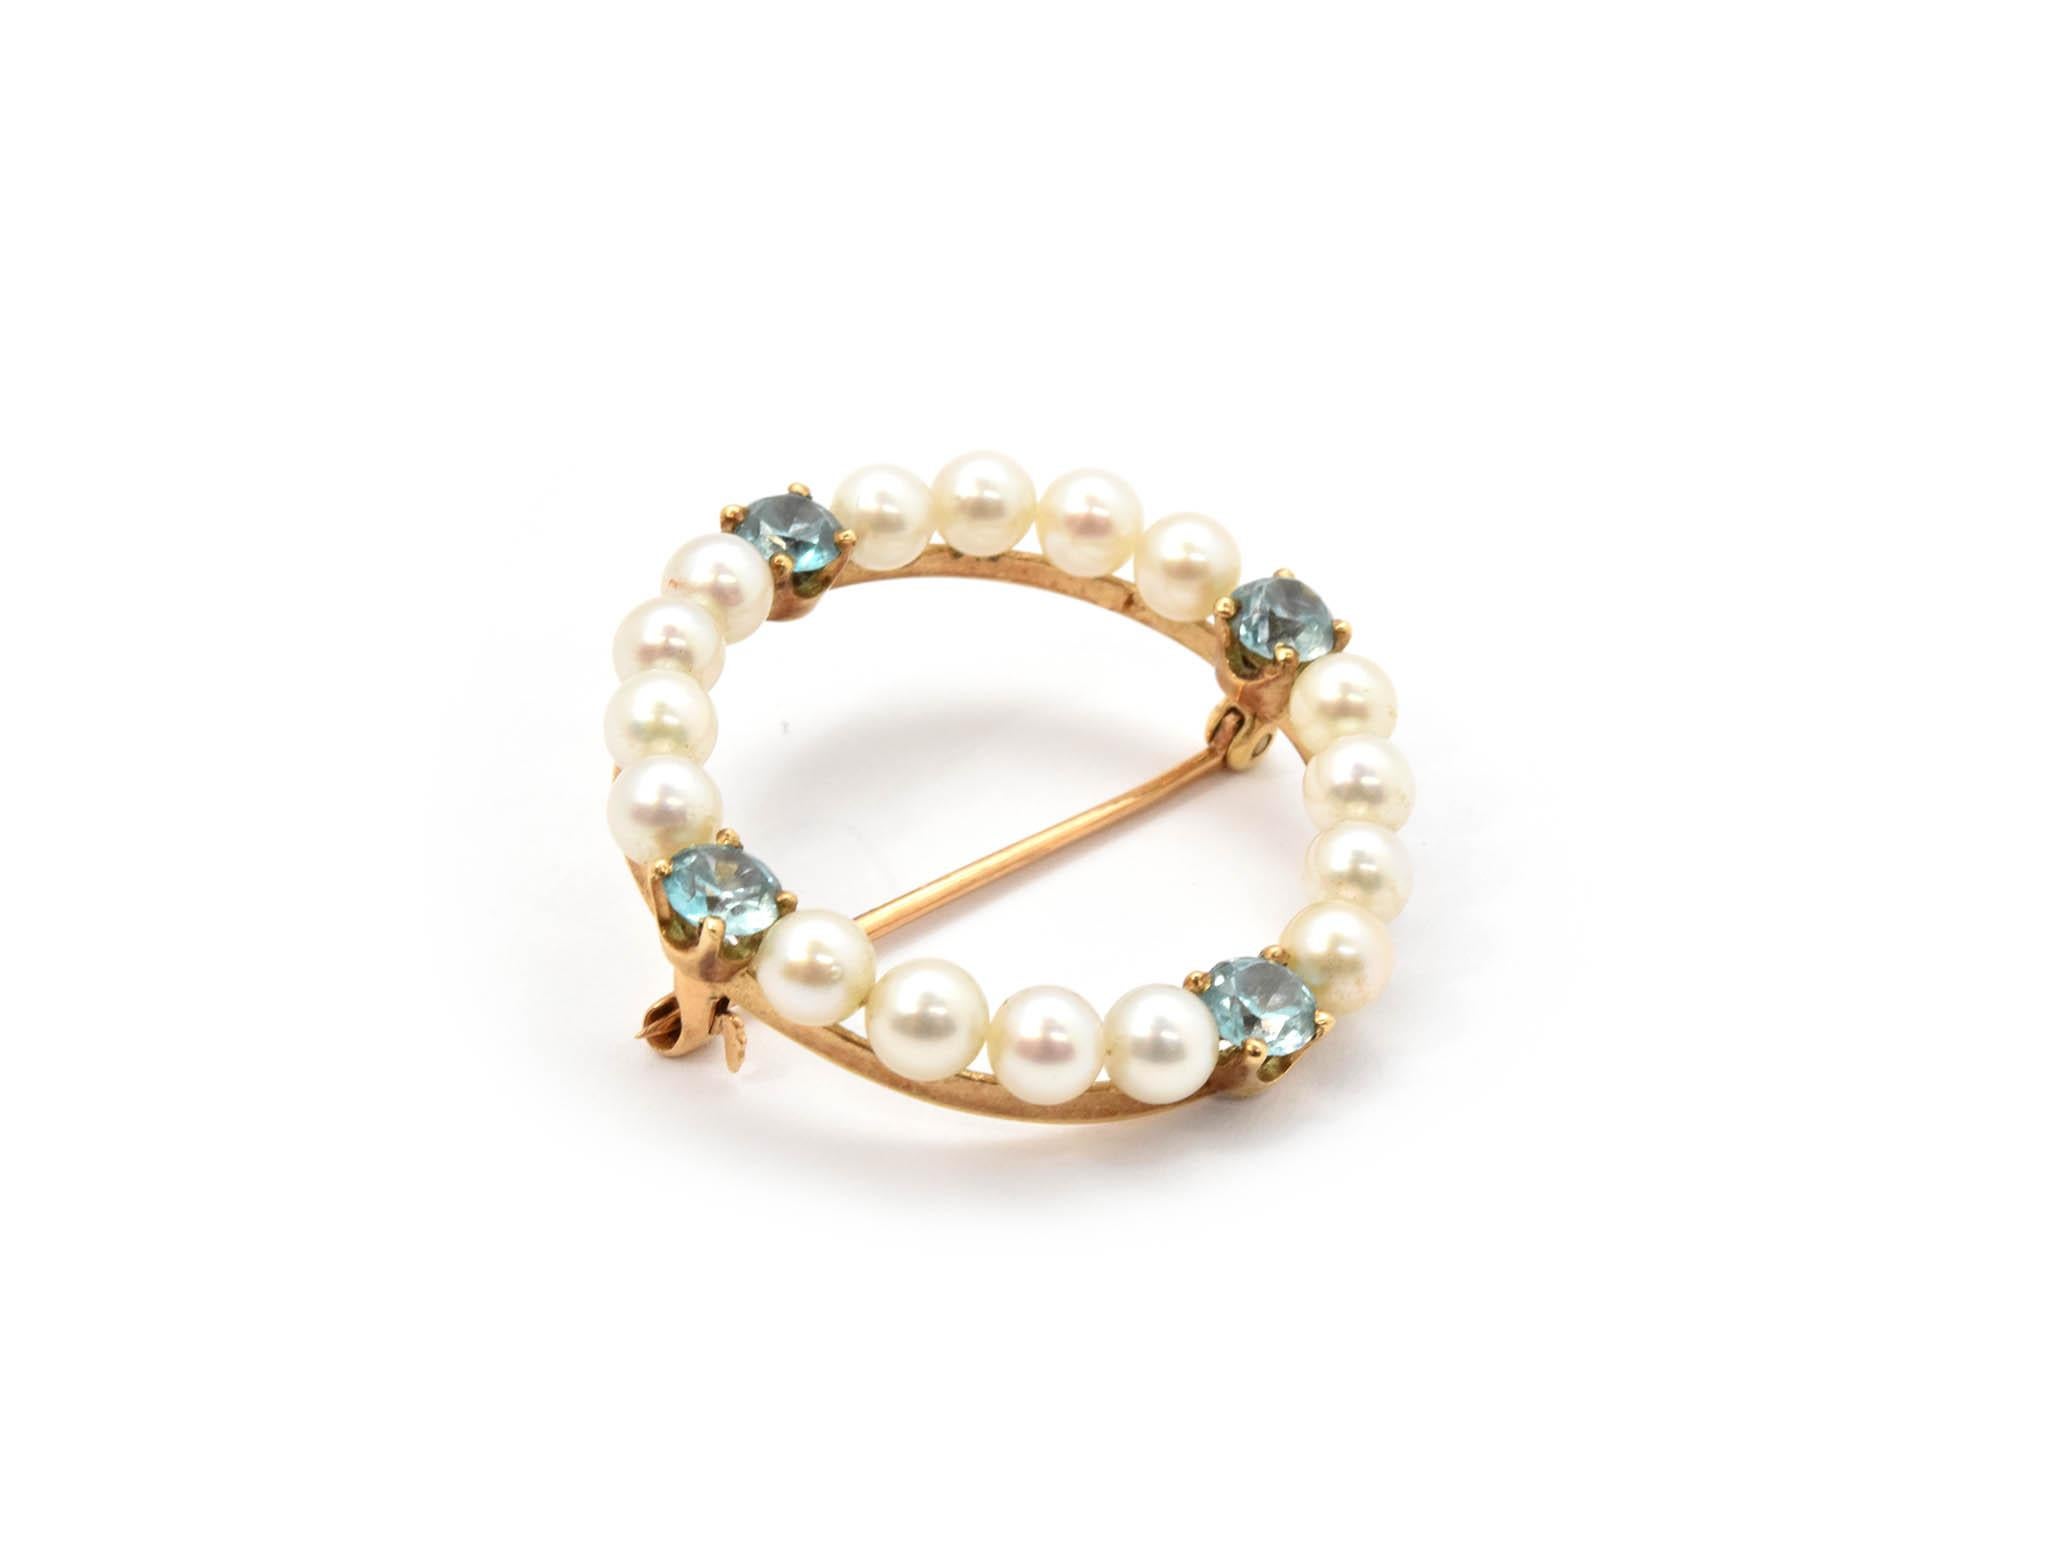 This brooch is made in 14k yellow gold, and it features white pearls accented by 4 blue zircon gemstones. The brooch measures 29mm in diameter, and it weighs 4.0 grams.